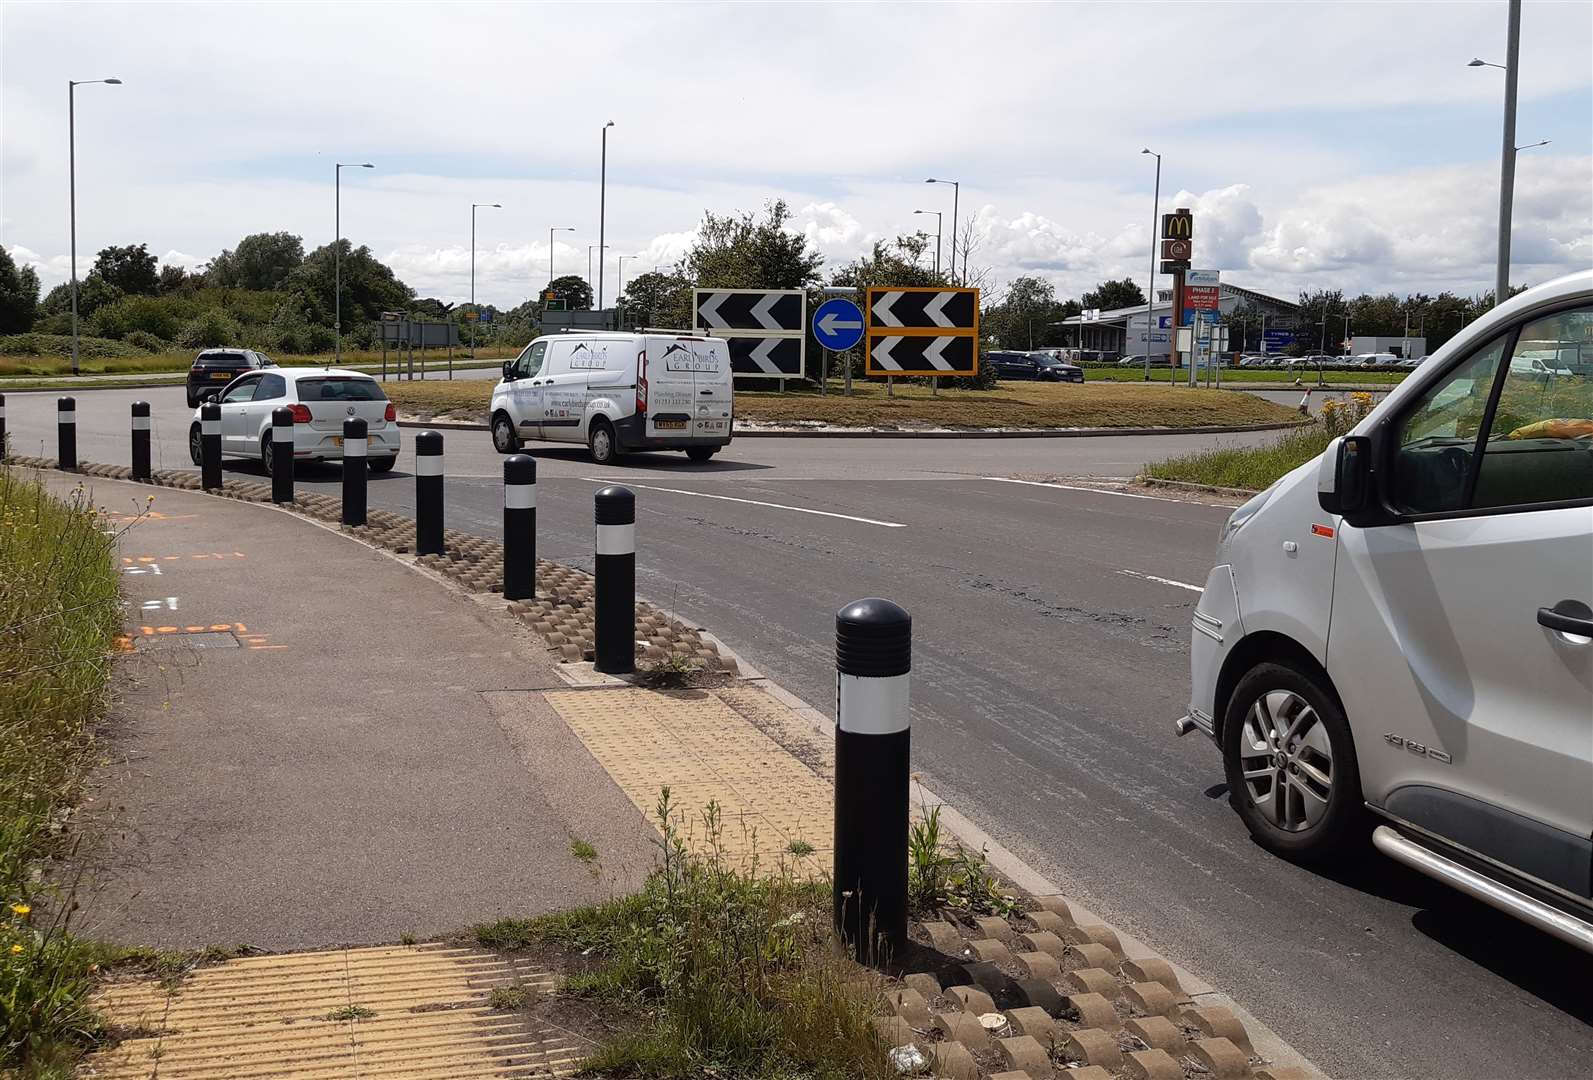 The Orbital Park roundabout, which is one of the busiest in Ashford, will be removed next year